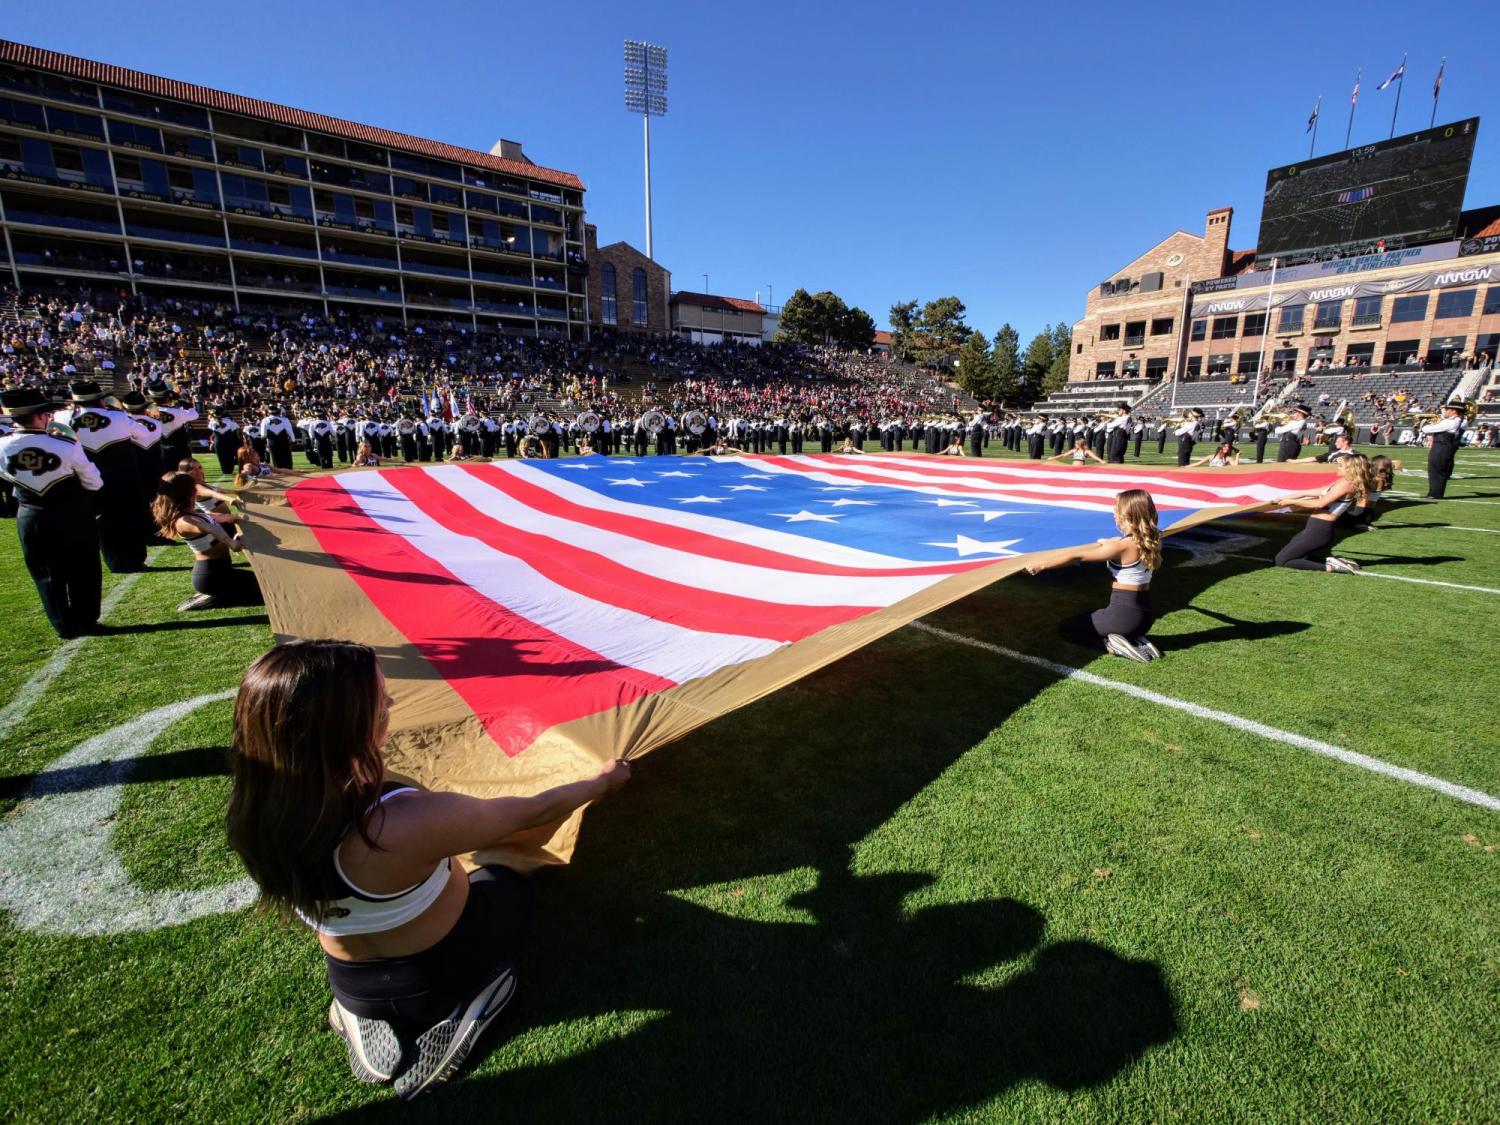 Scene at CU Veterans Day and diversity CU Boulder Today